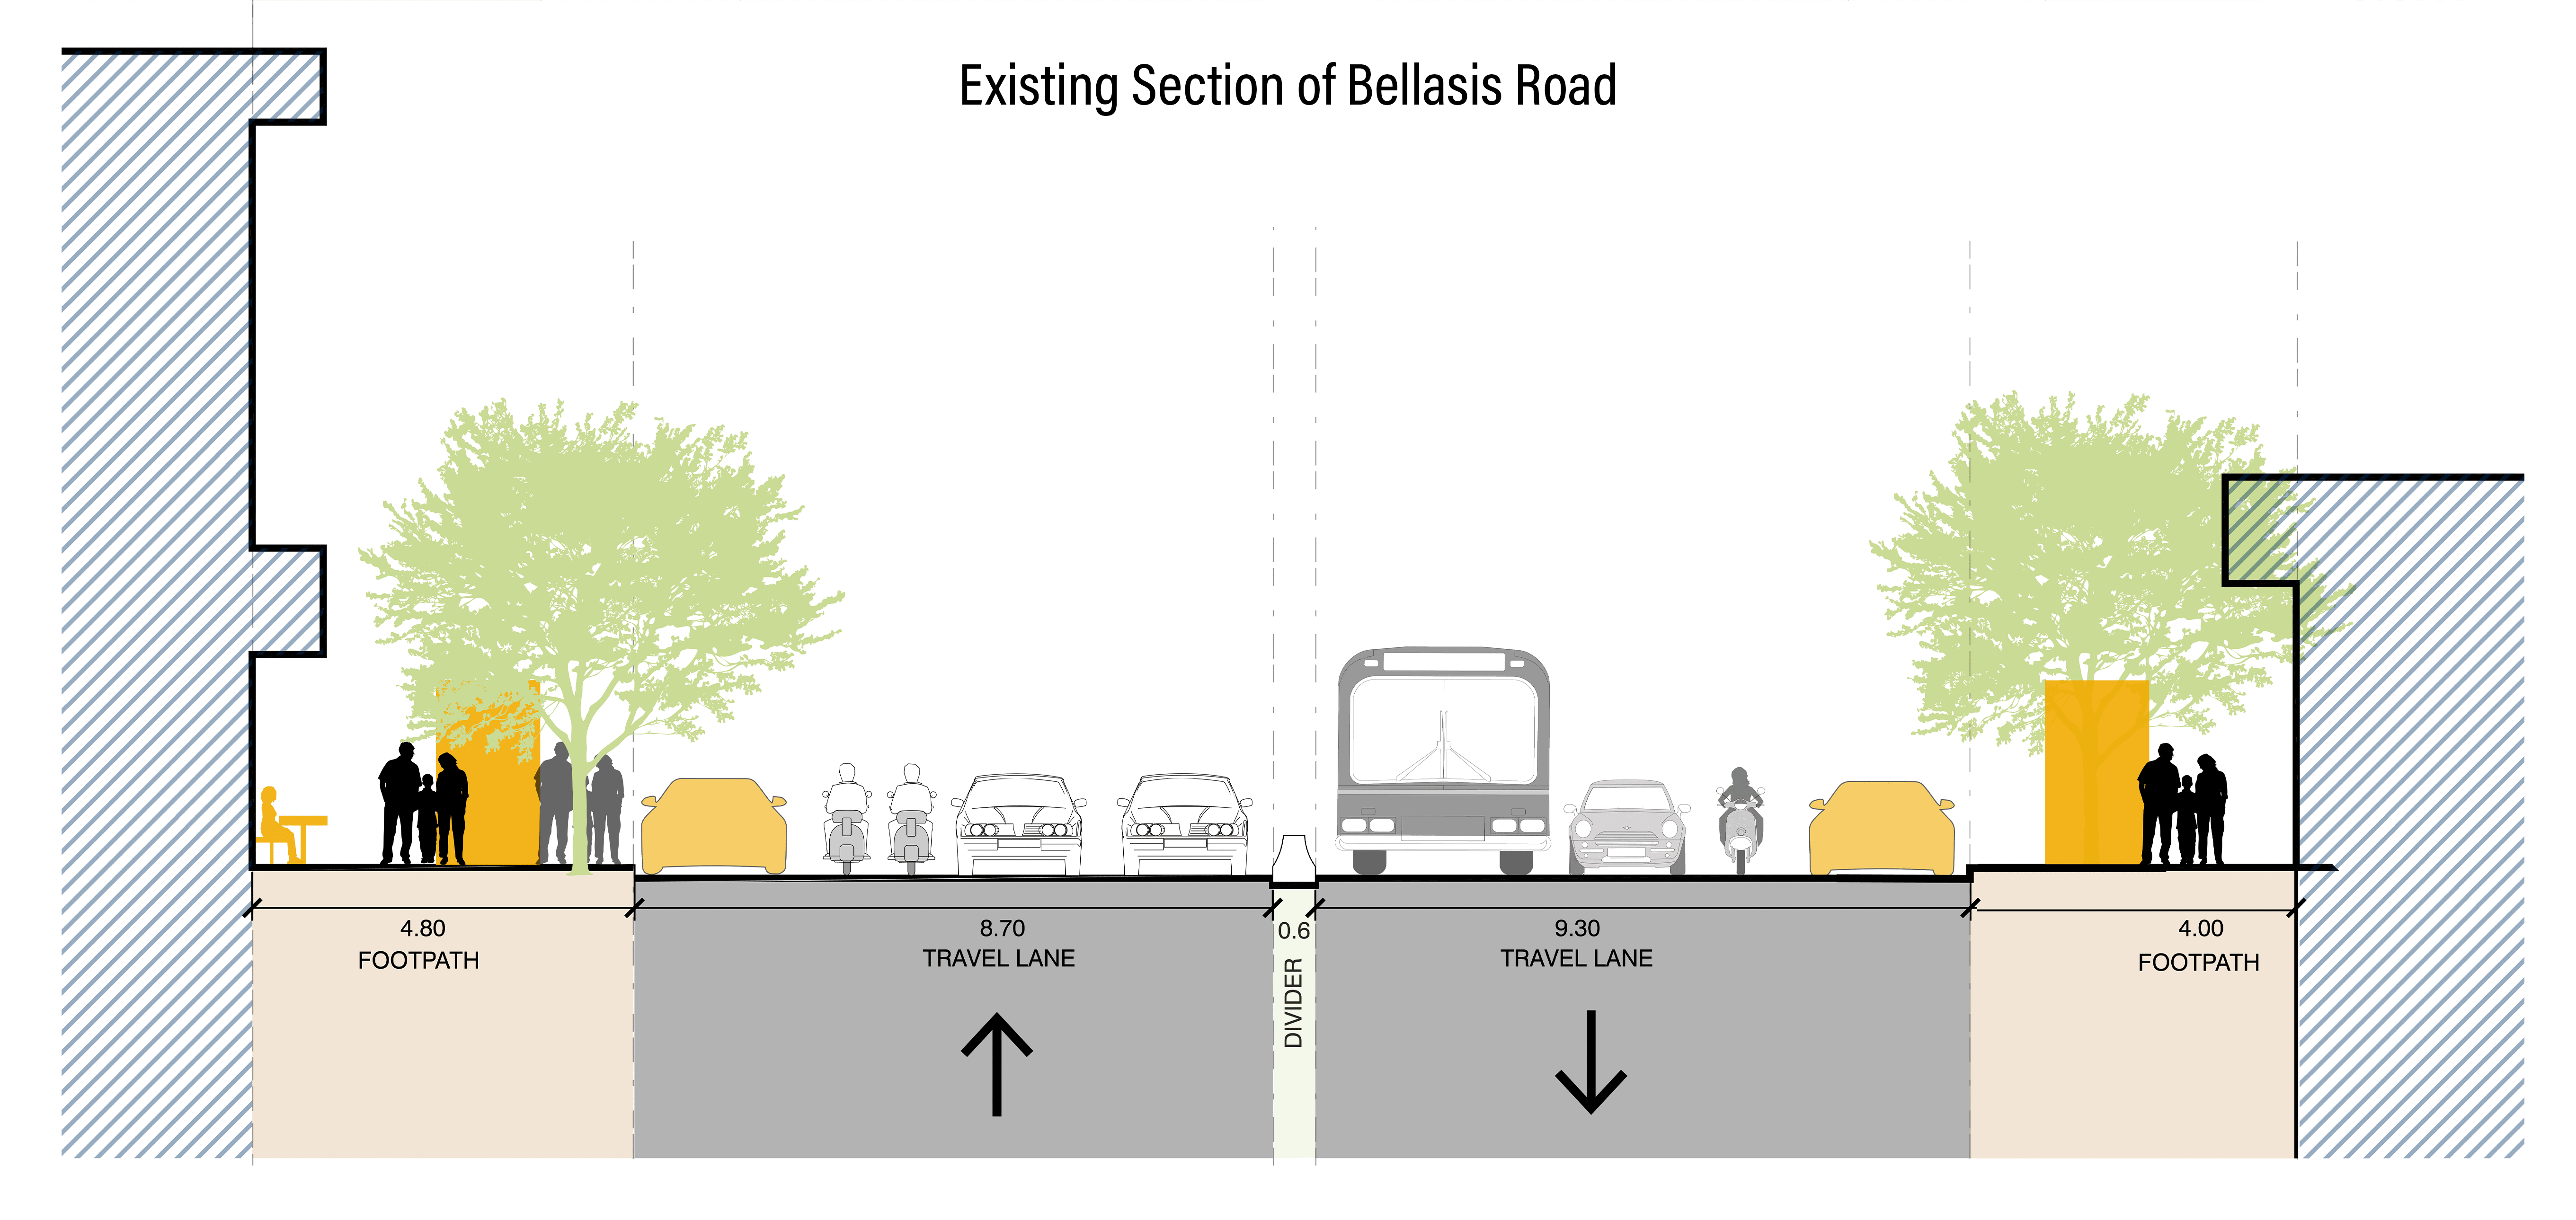 Existing and proposed section of Bellasis Road.